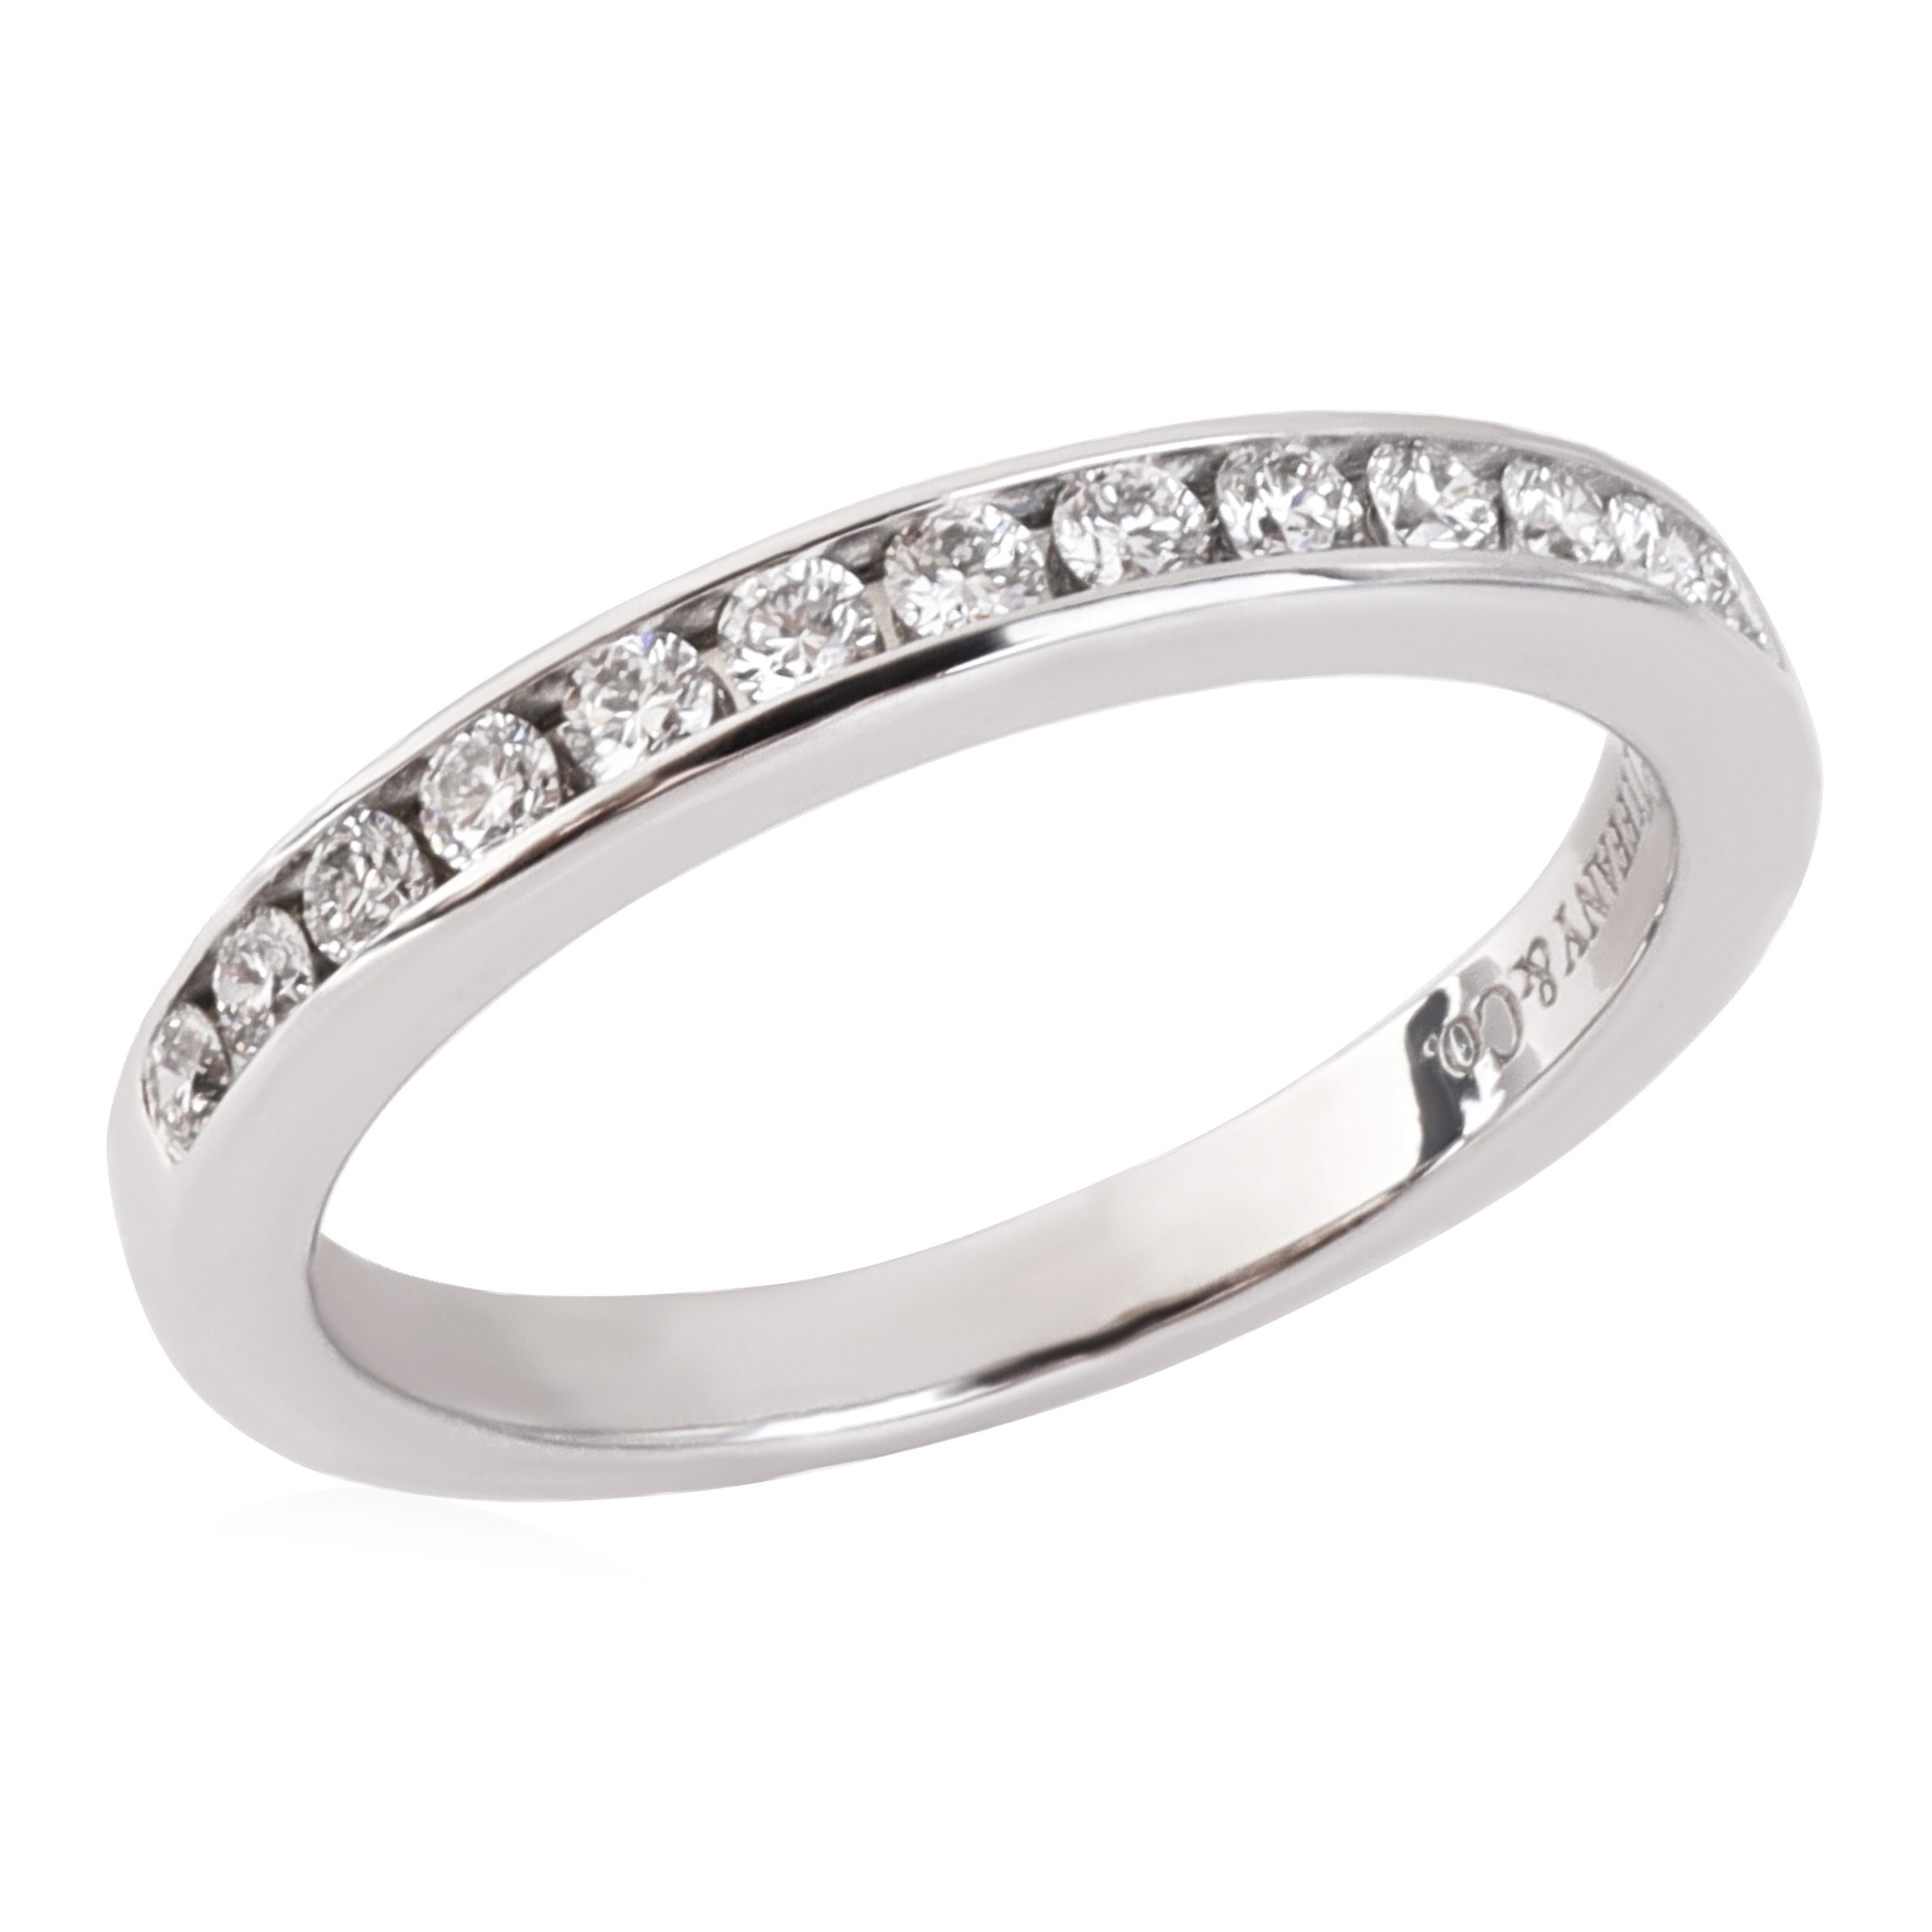 Tiffany & Co. Channel Set Diamond Wedding Band in Platinum (0.24 ctw)

PRIMARY DETAILS
SKU: 119630
Listing Title: Tiffany & Co. Channel Set Diamond Wedding Band in Platinum (0.24 ctw)
Condition Description: Retails for 3000 USD. In excellent